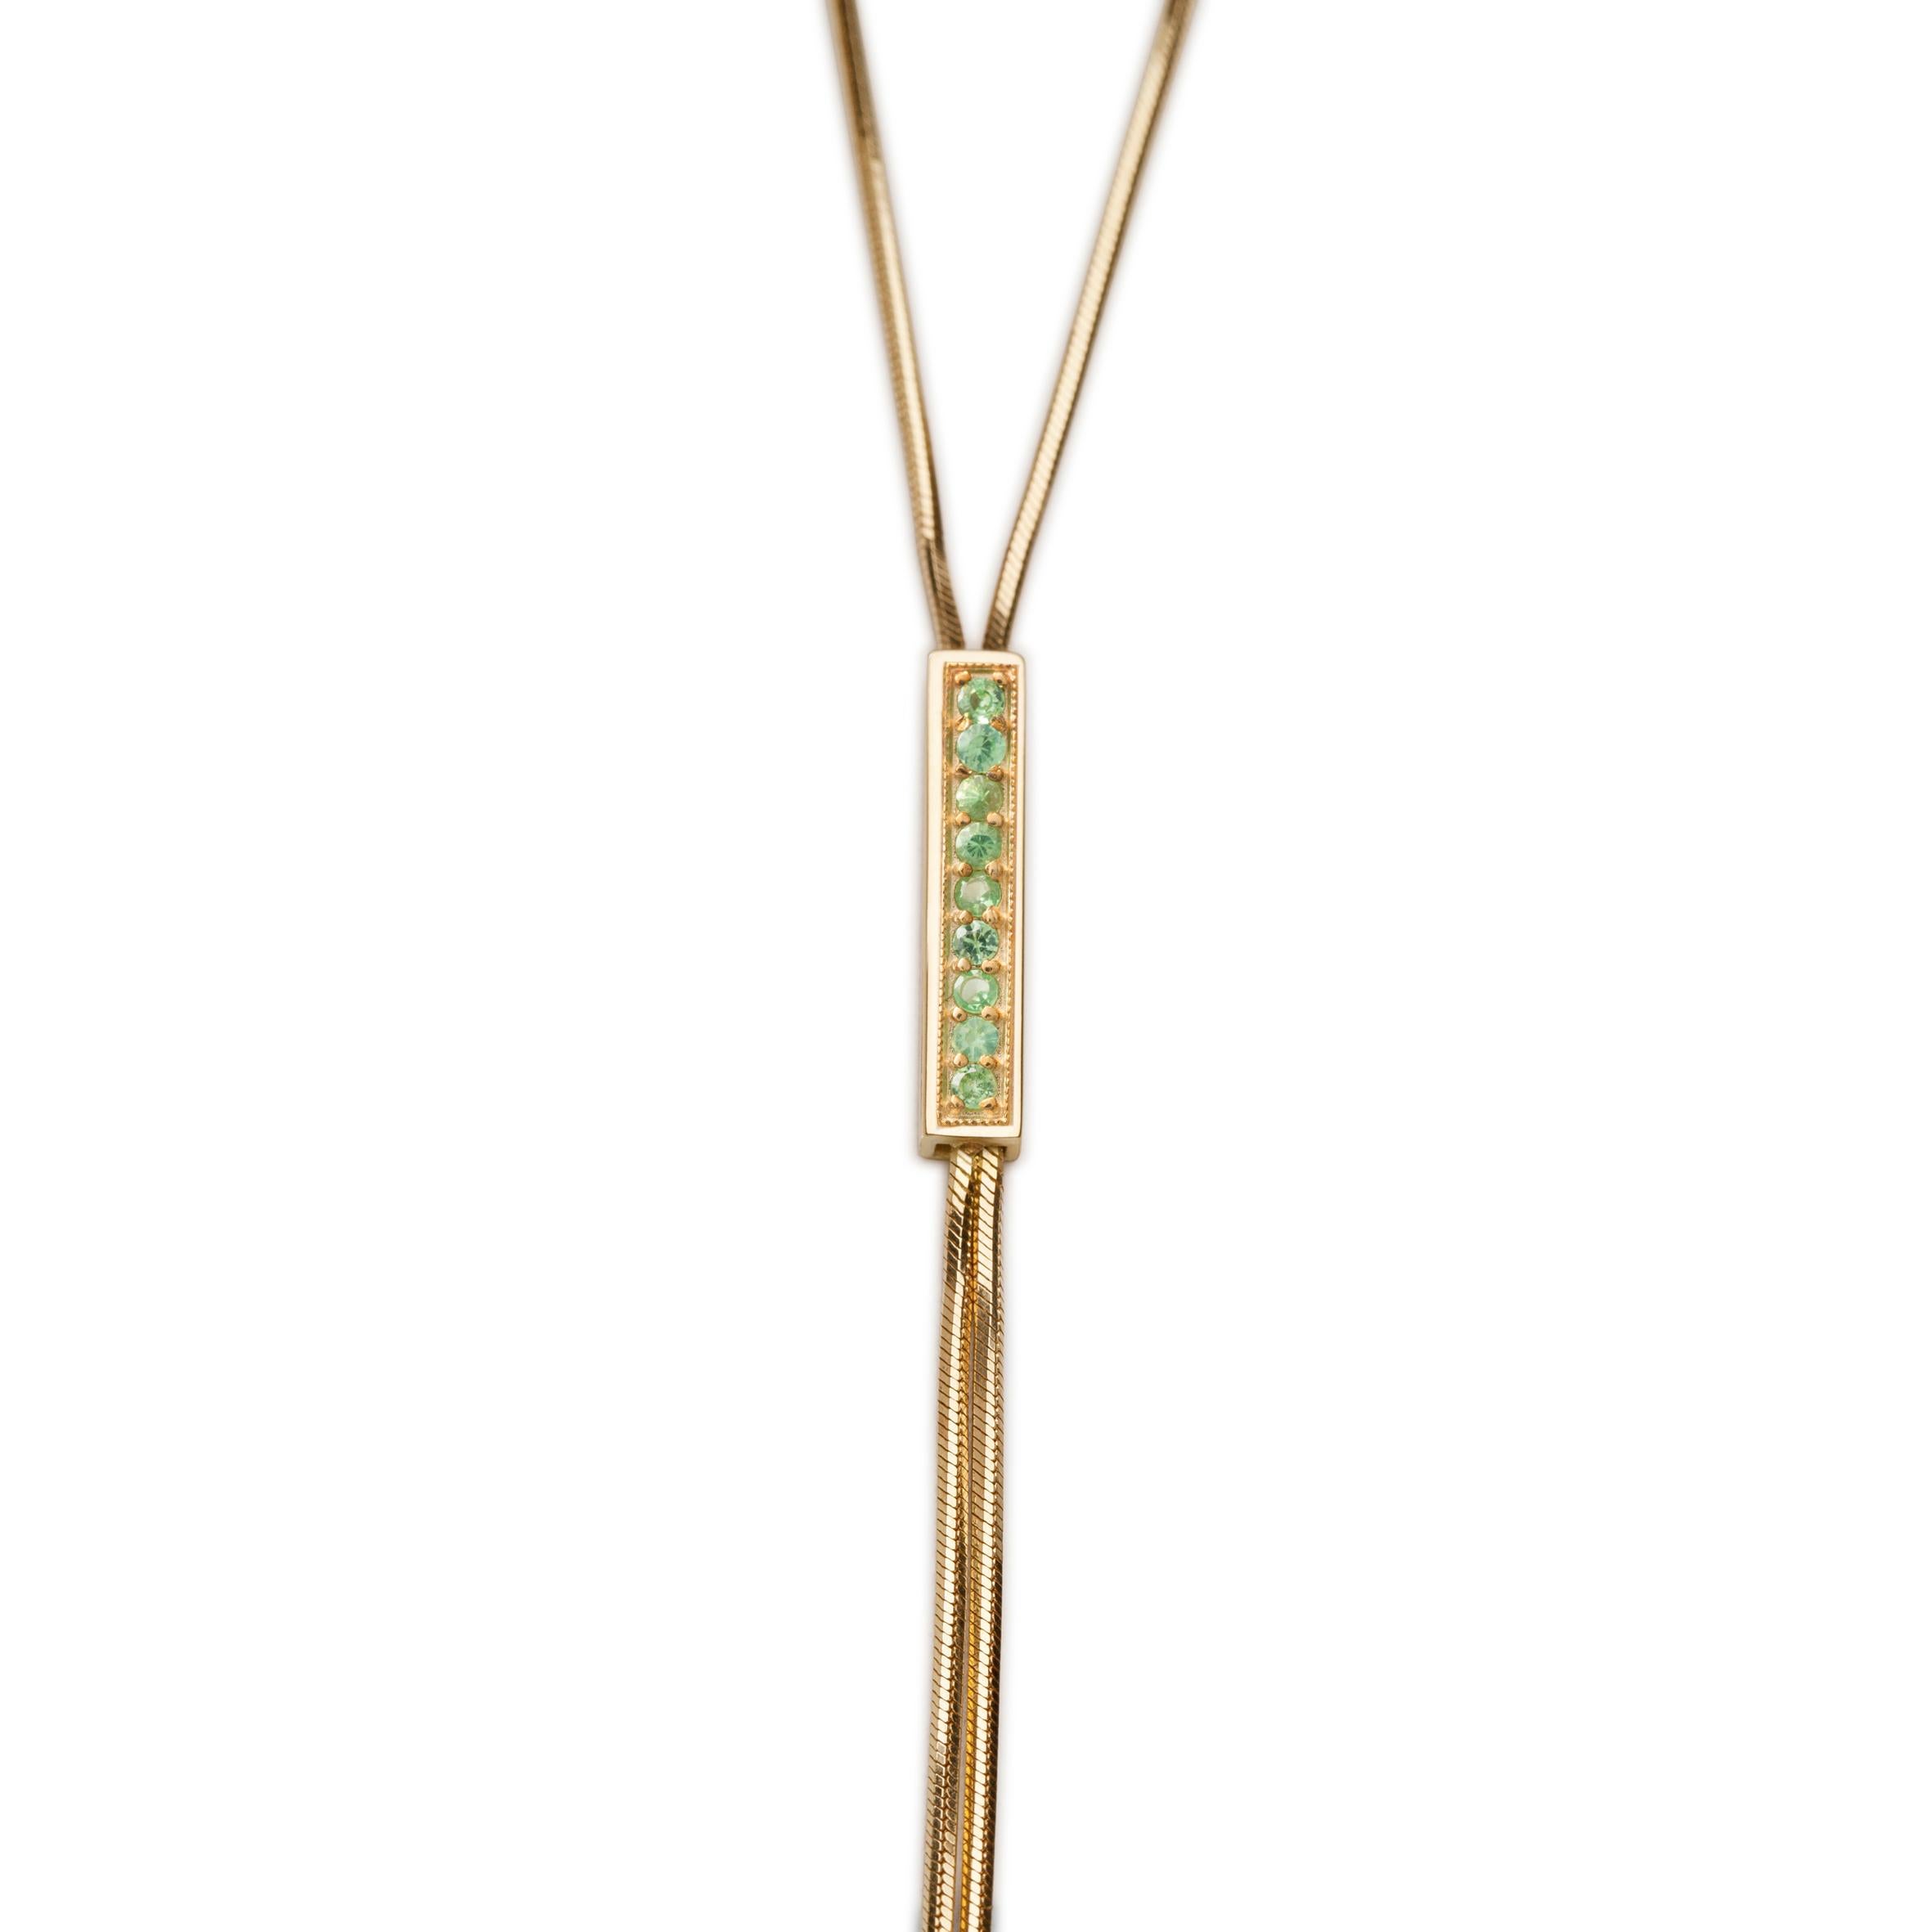 This captivating necklace from Iosselliani drapes along the neck with a 9 Karat gold custom made chain for a minimal, elegant design. The lariat is bejeweled by a central bar with 0,21 green sapphire pavé to maximise visual impact. Round neck lenght